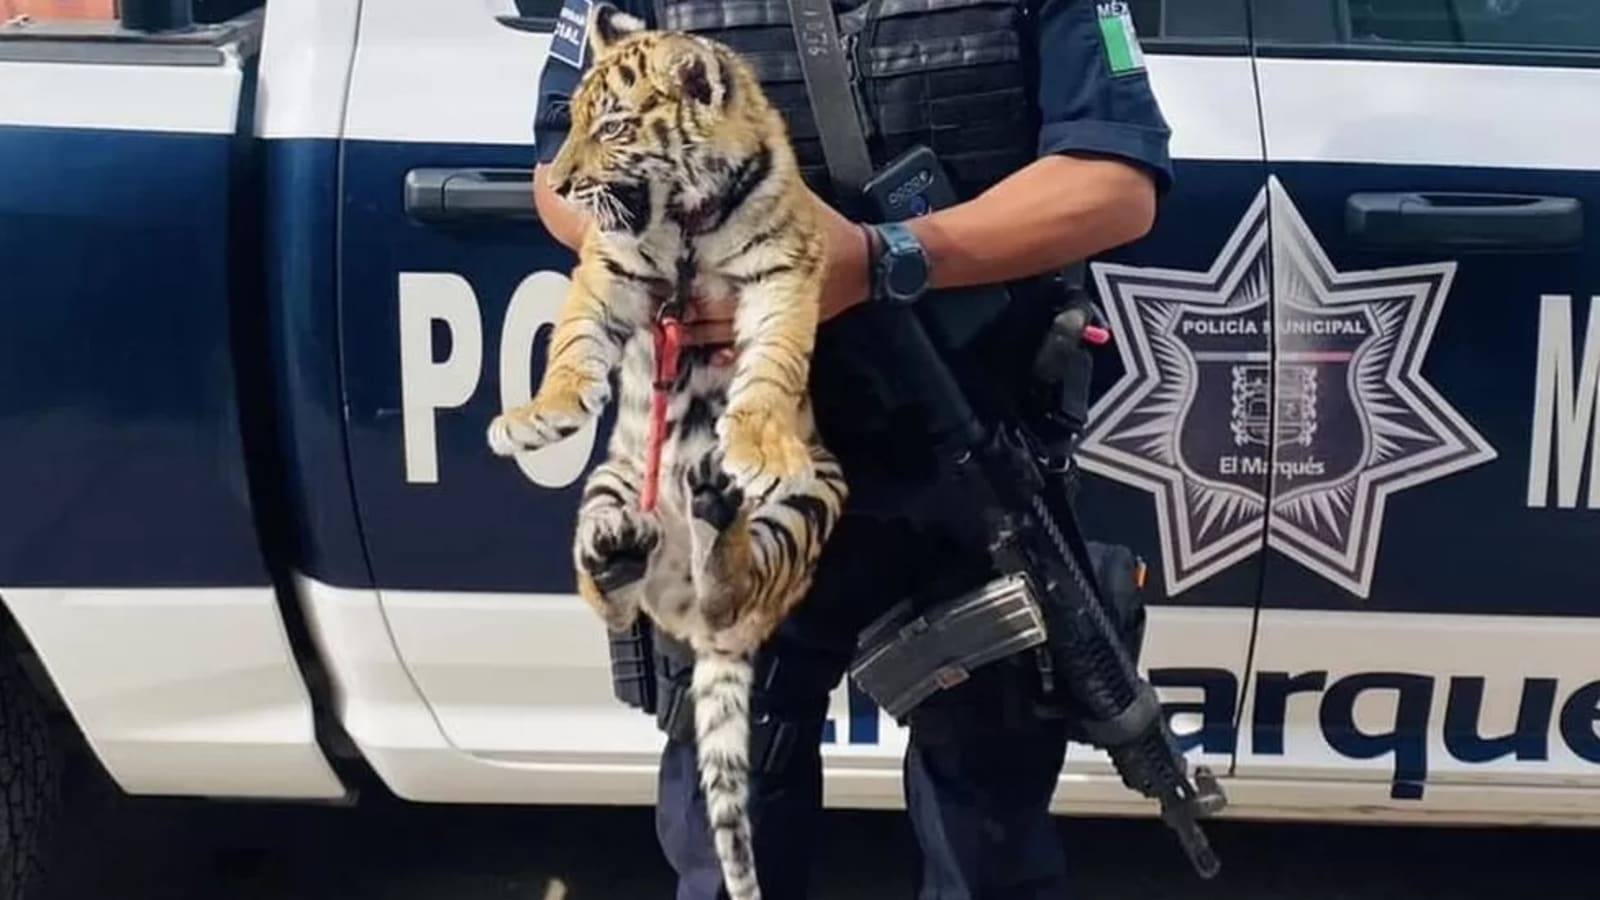 Tiger was found in the trunk of the car